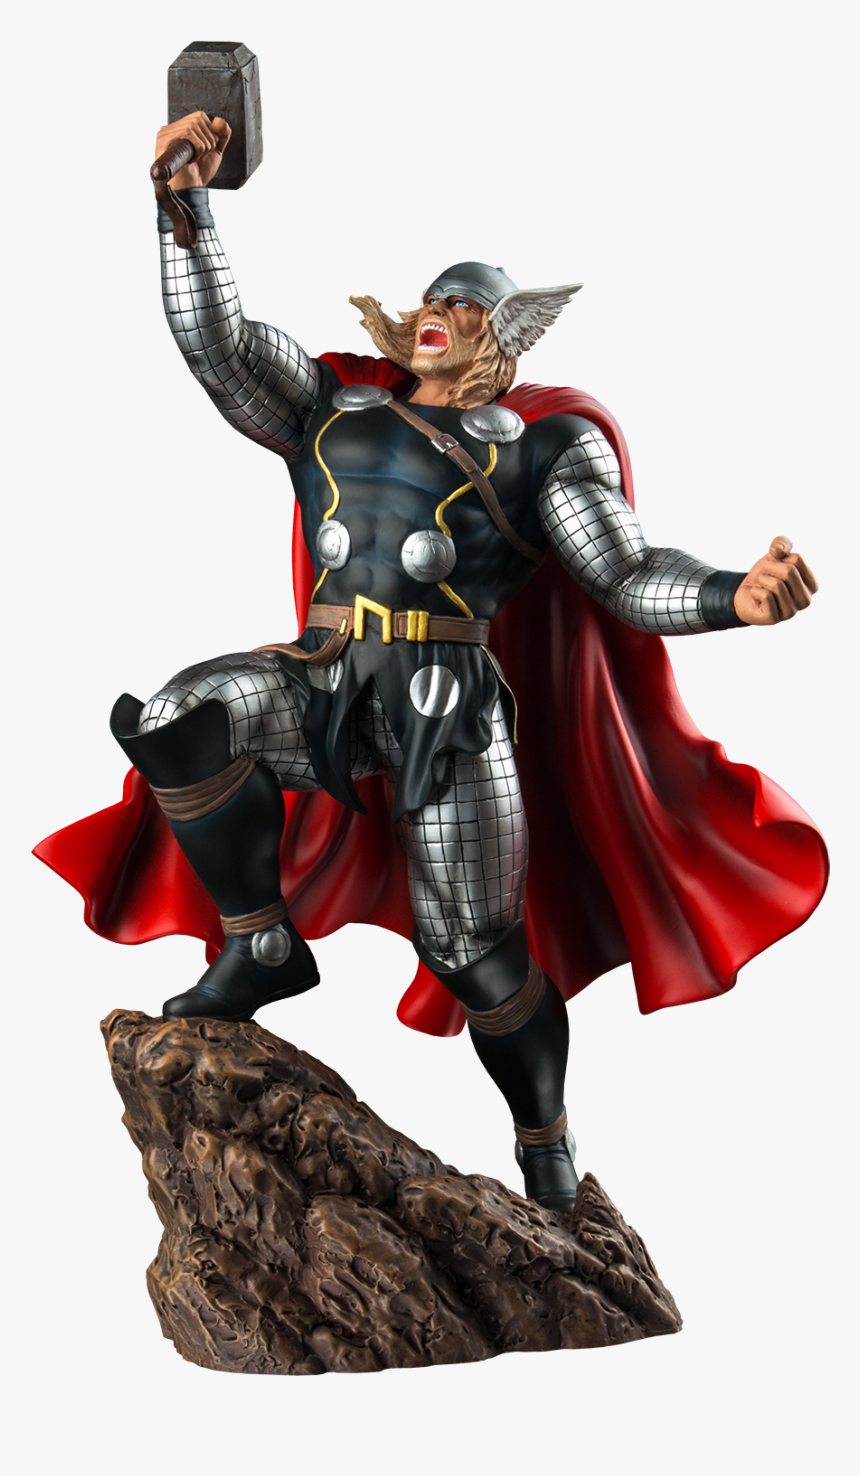 1/6th Scale Limited Edition Statue Main Image - 1 6 Scale Statues, HD Png Download, Free Download